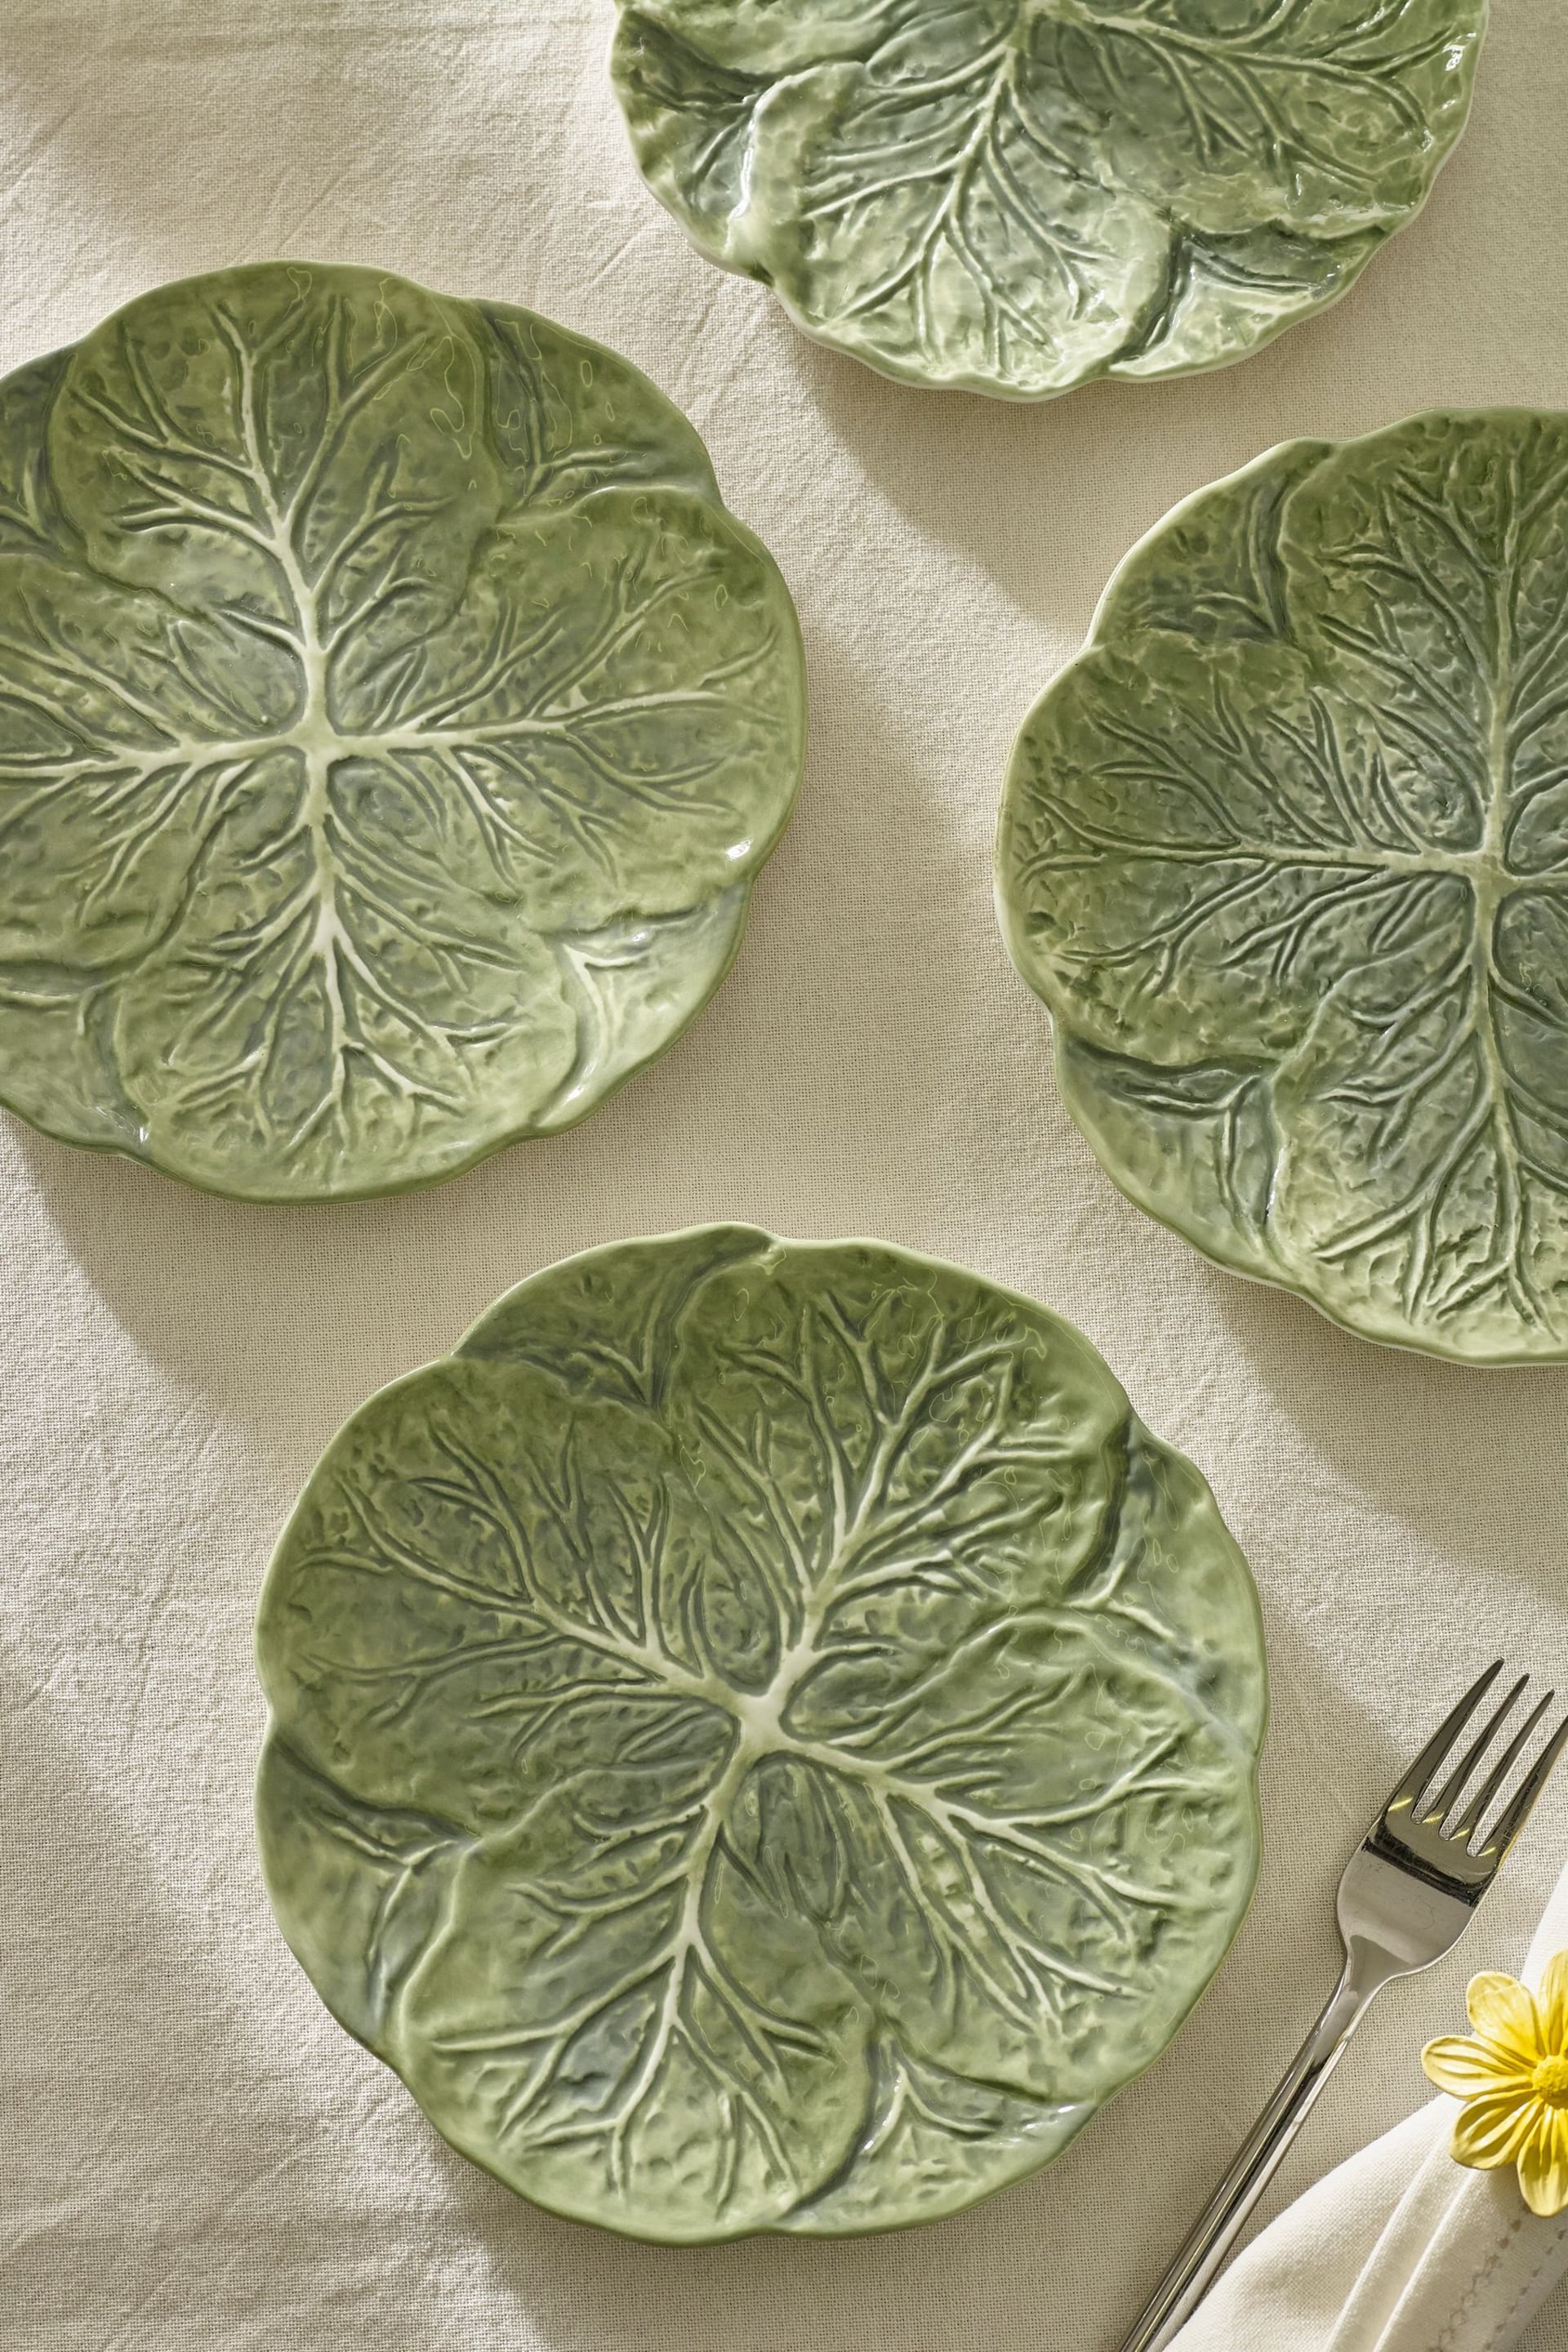 Set of 4 Green Cabbage Side Plates - Image 2 of 4